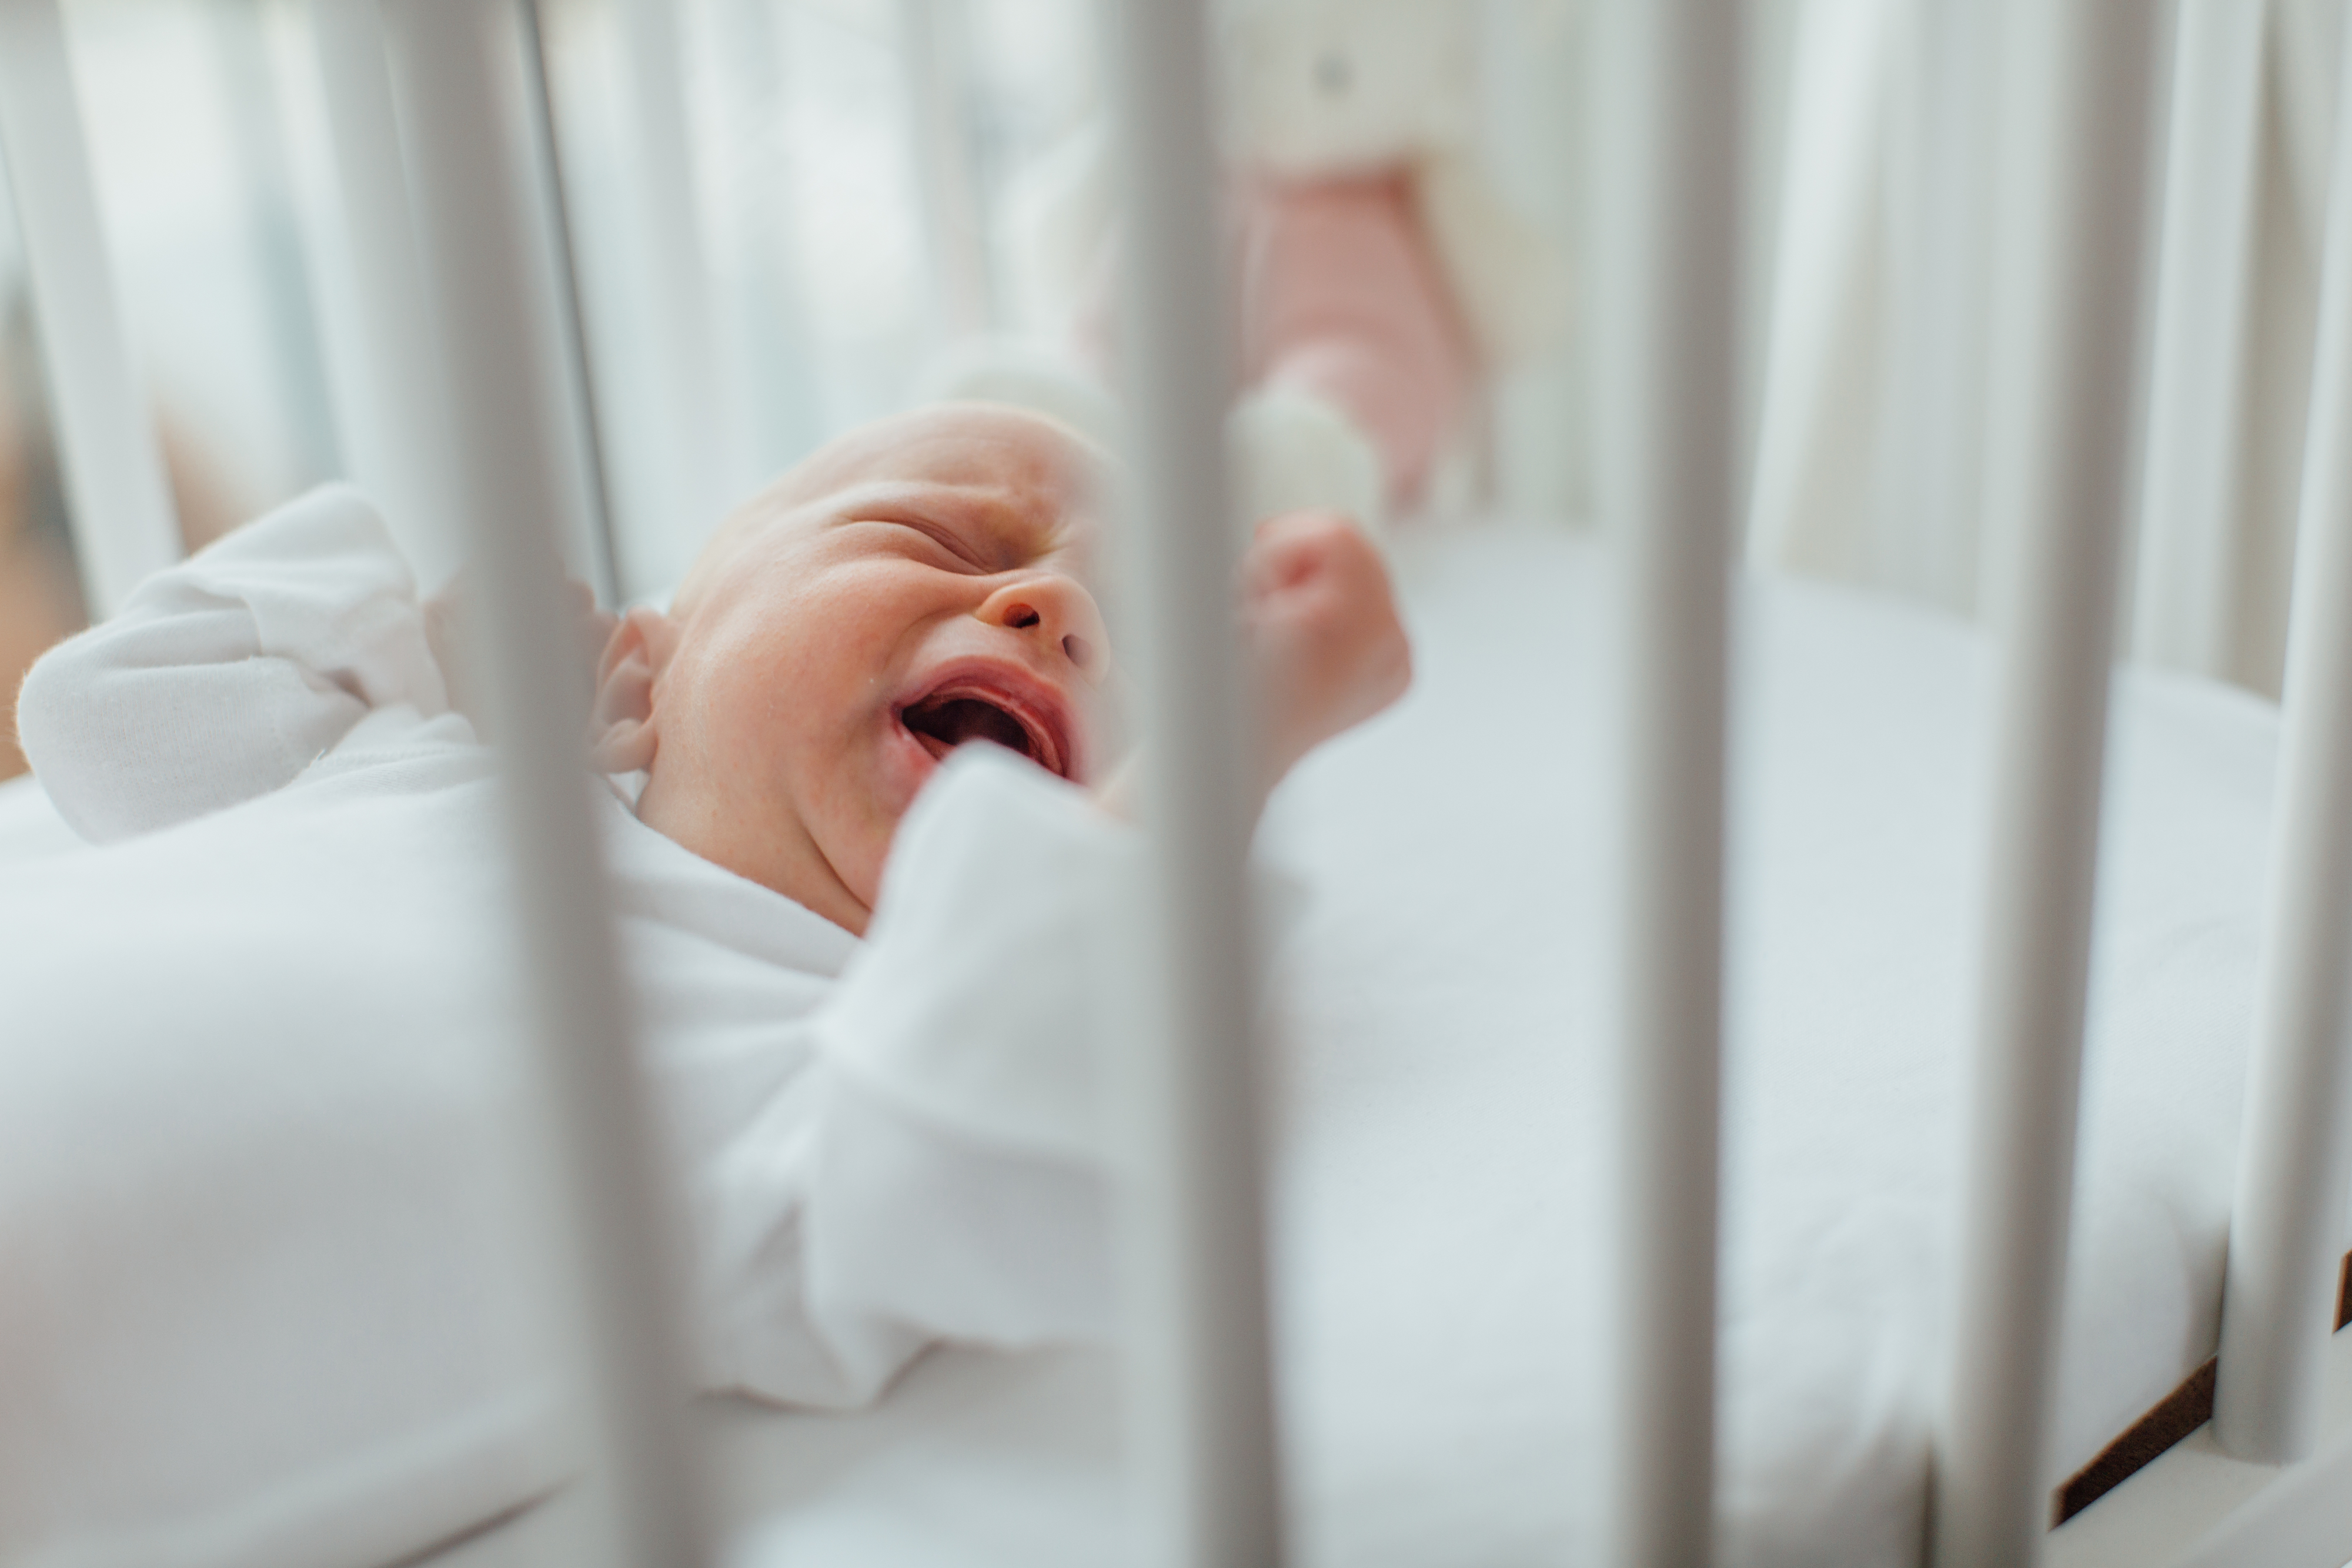 A crying infant in a crib